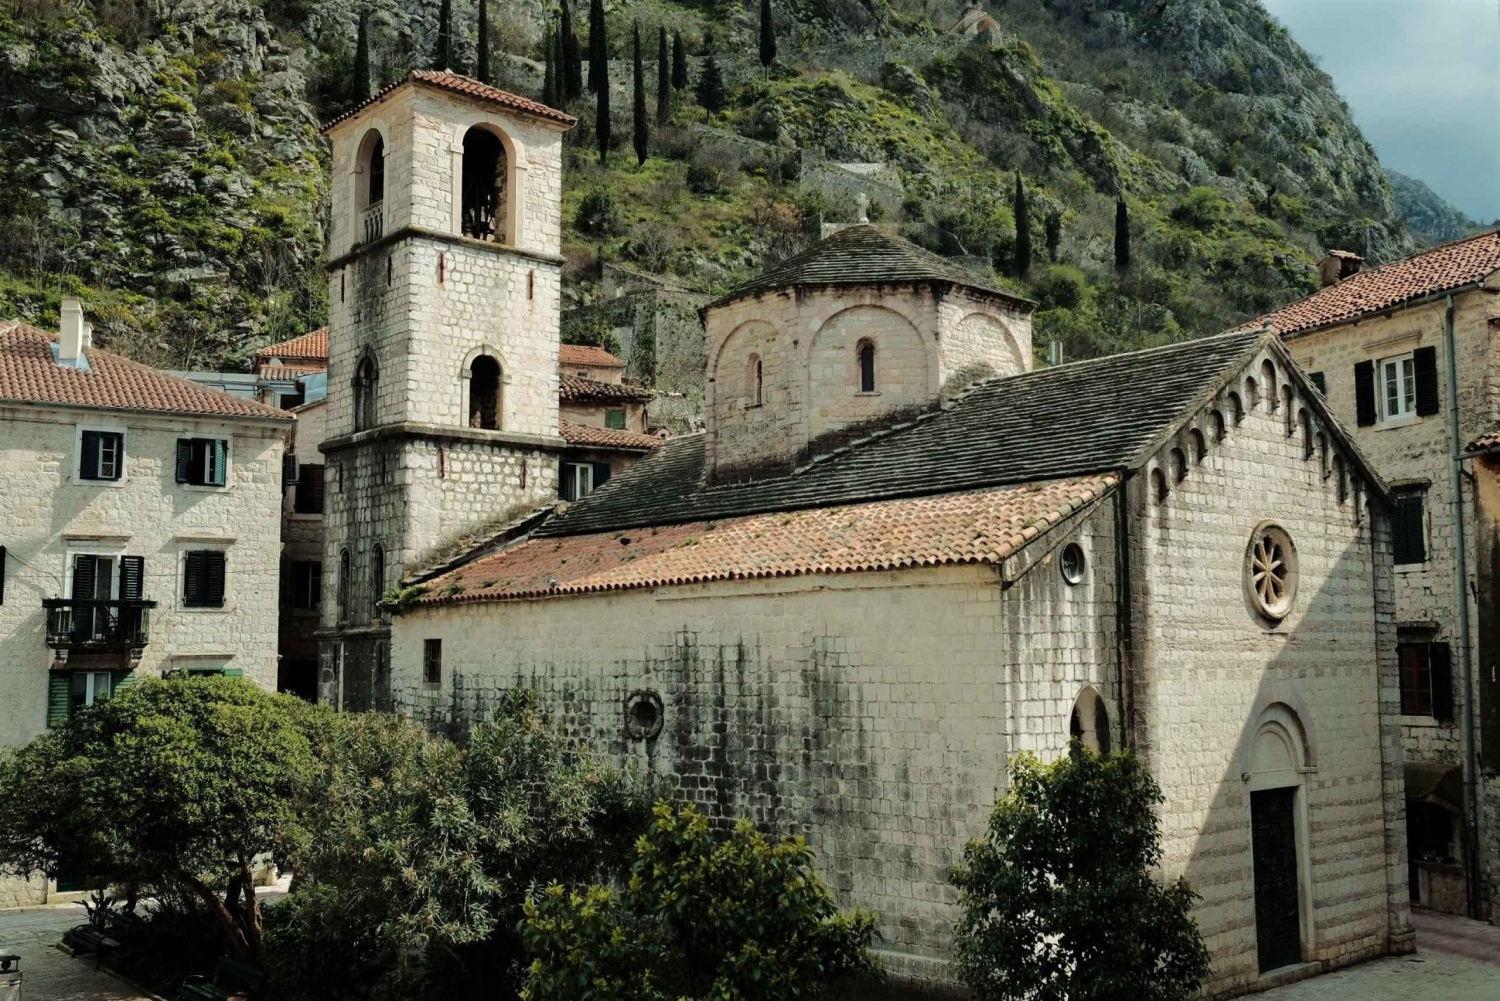 Private Kotor and Perast tour - Baroque charm of Montenegro